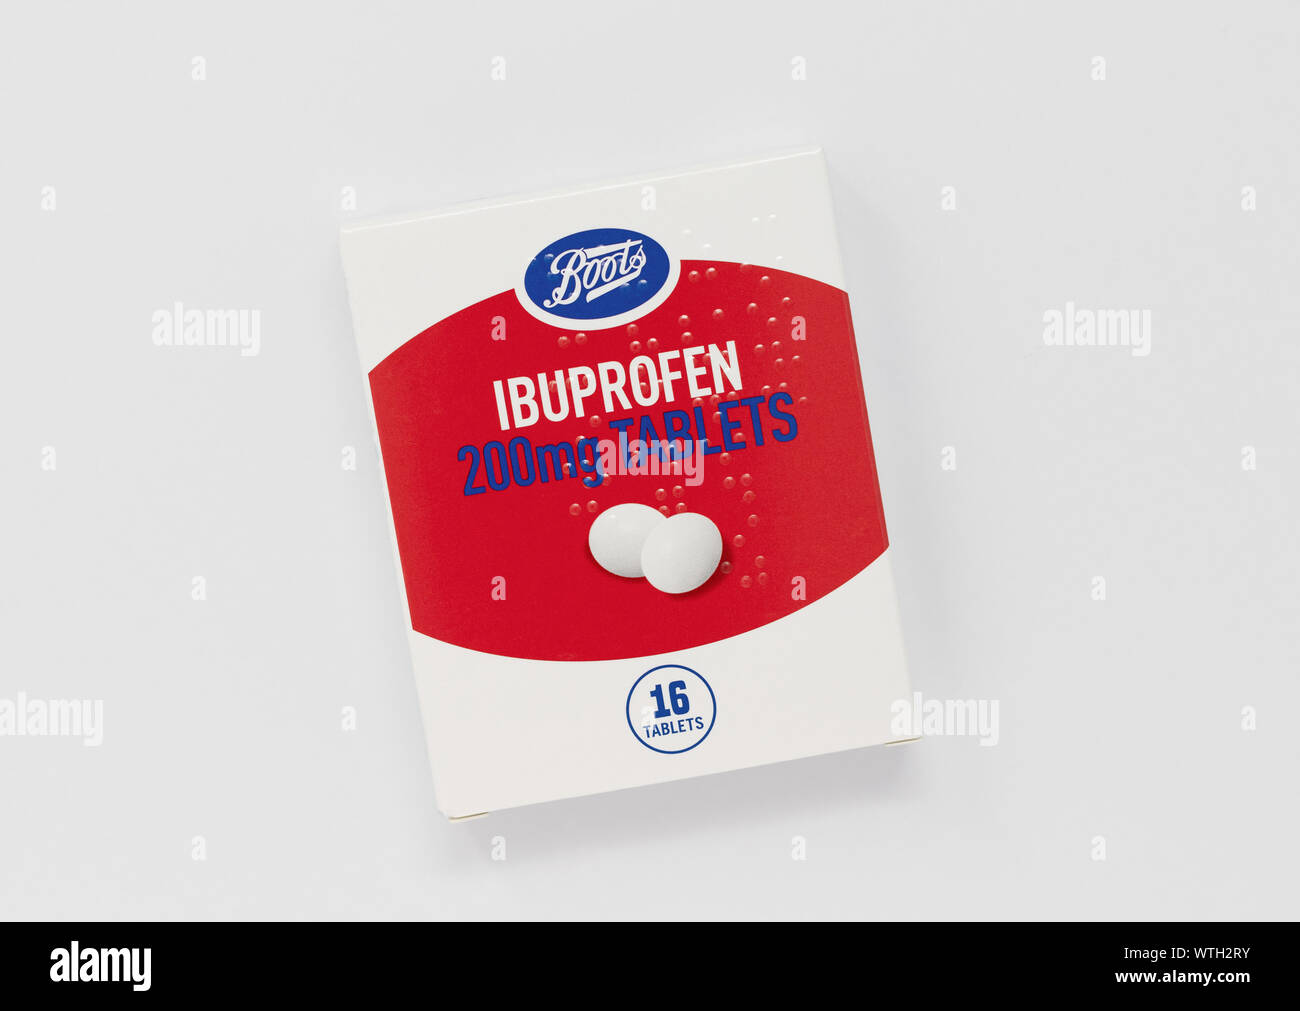 London / UK - September 7th 2019 - Packet of Ibuprofen painkillers, closeup of packet from Boots pharmacy Stock Photo